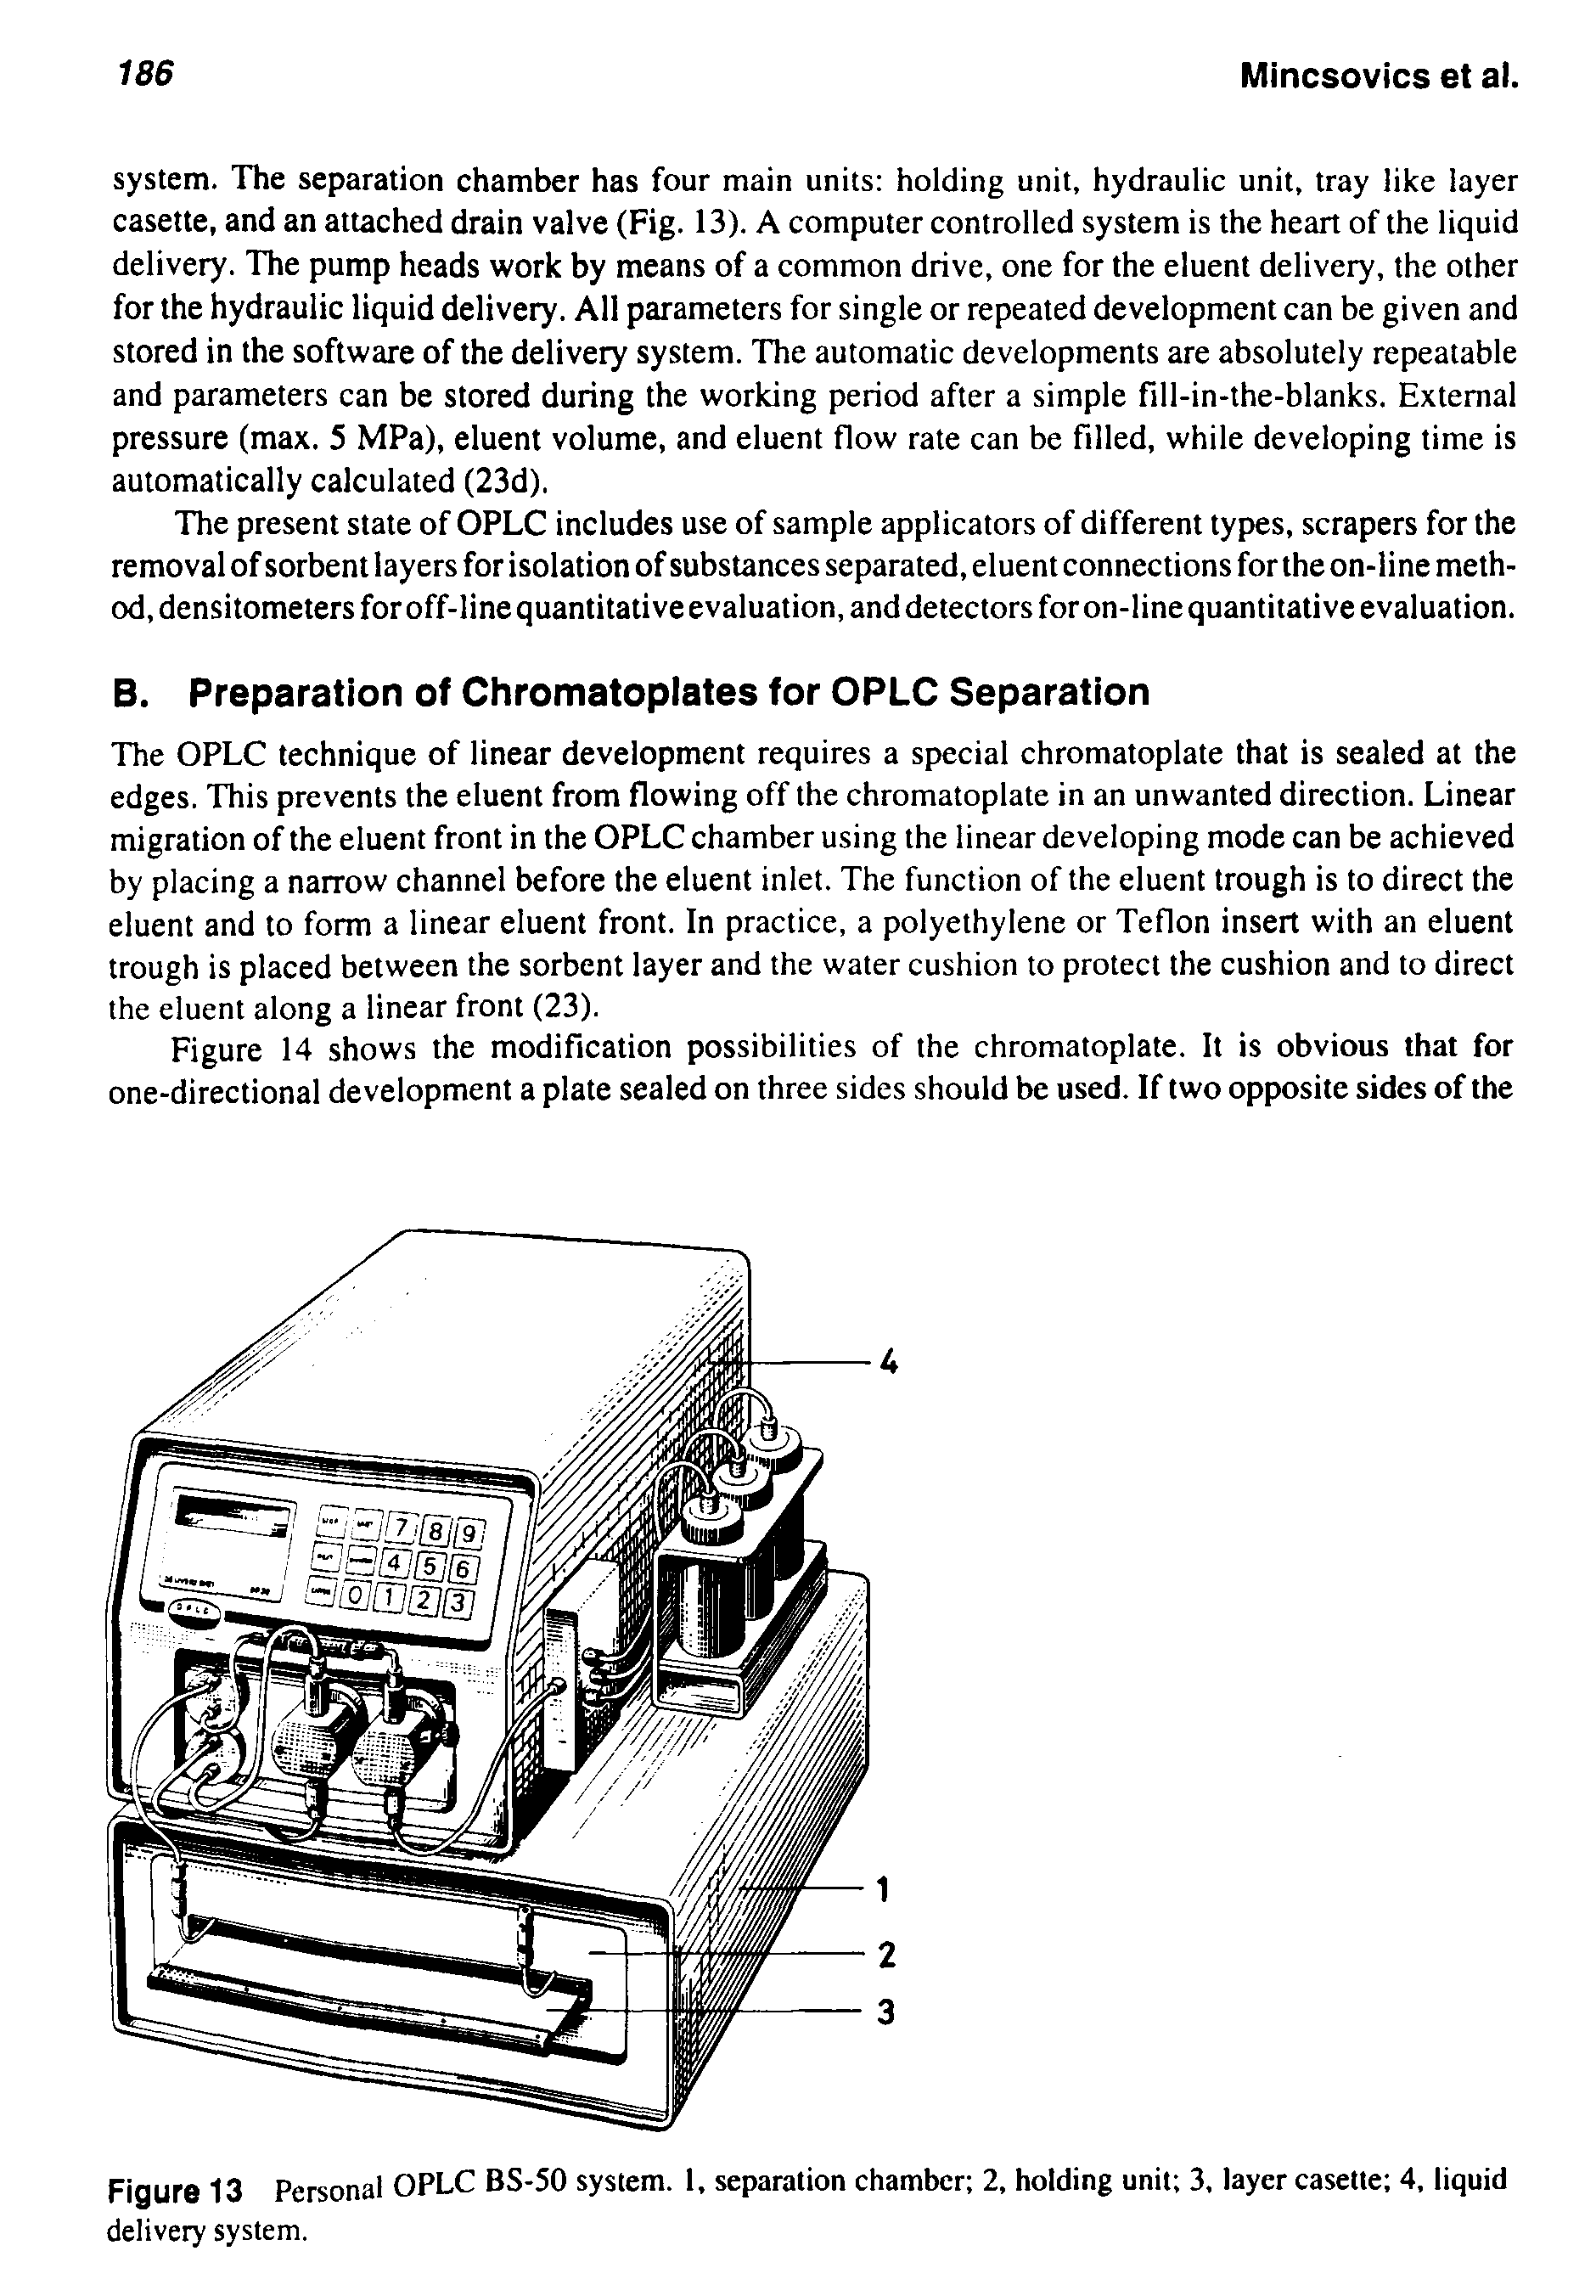 Figure 13 Personal OPLC BS-50 system. 1, separation chamber 2, holding unit 3, layer casette 4, liquid delivery system.